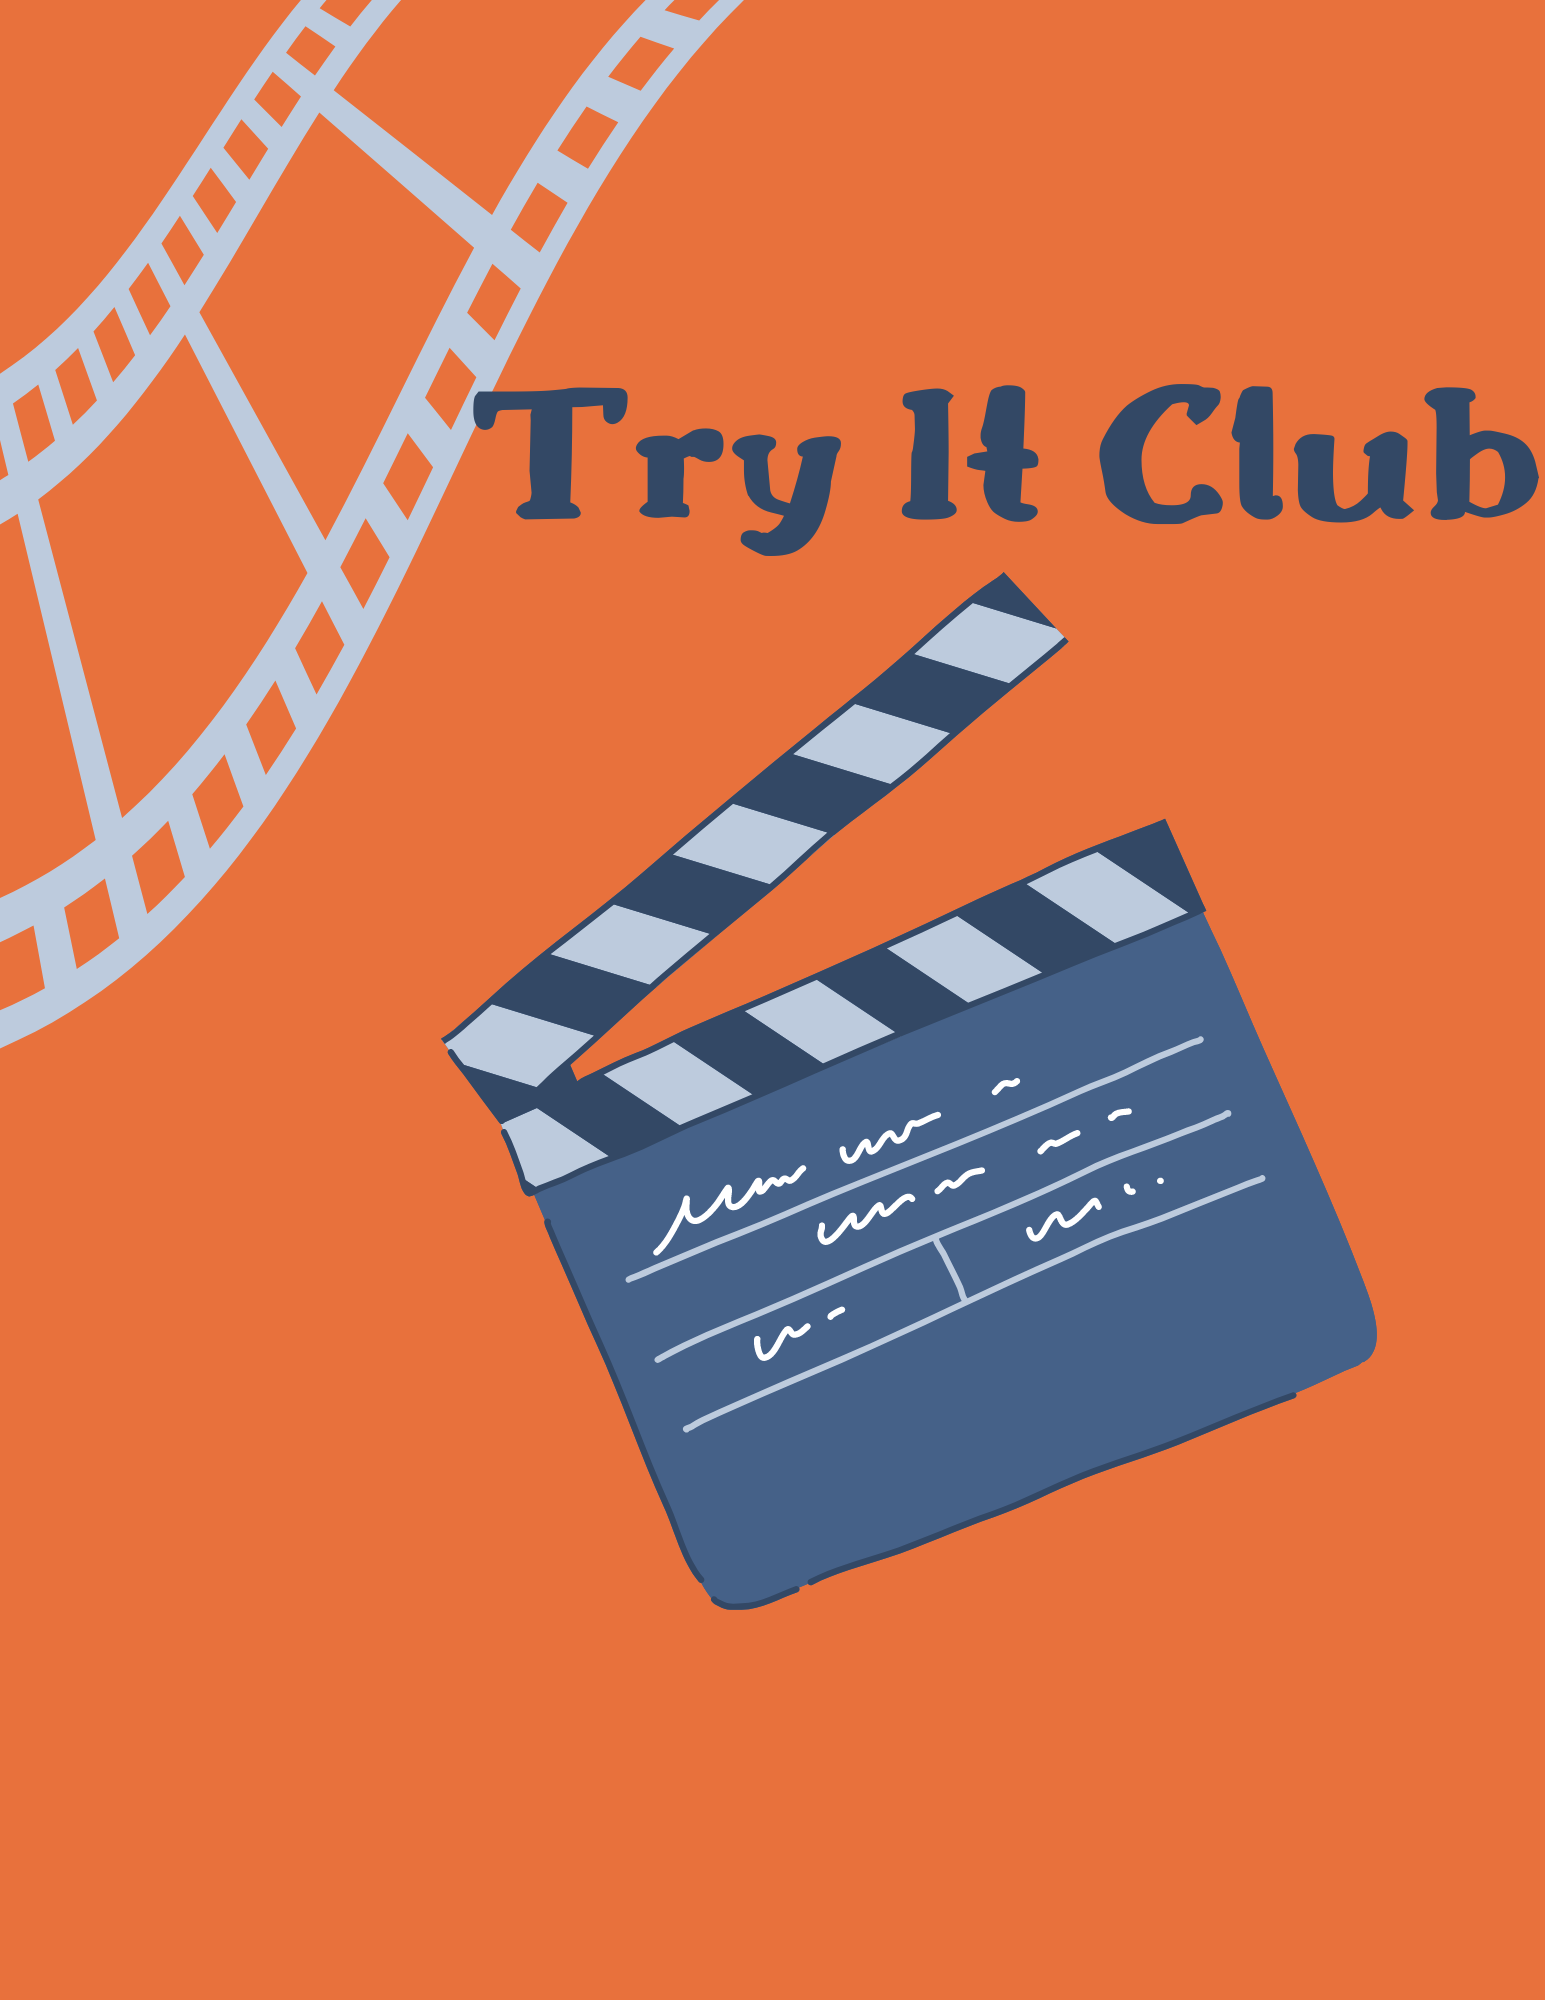 try it club image with film images